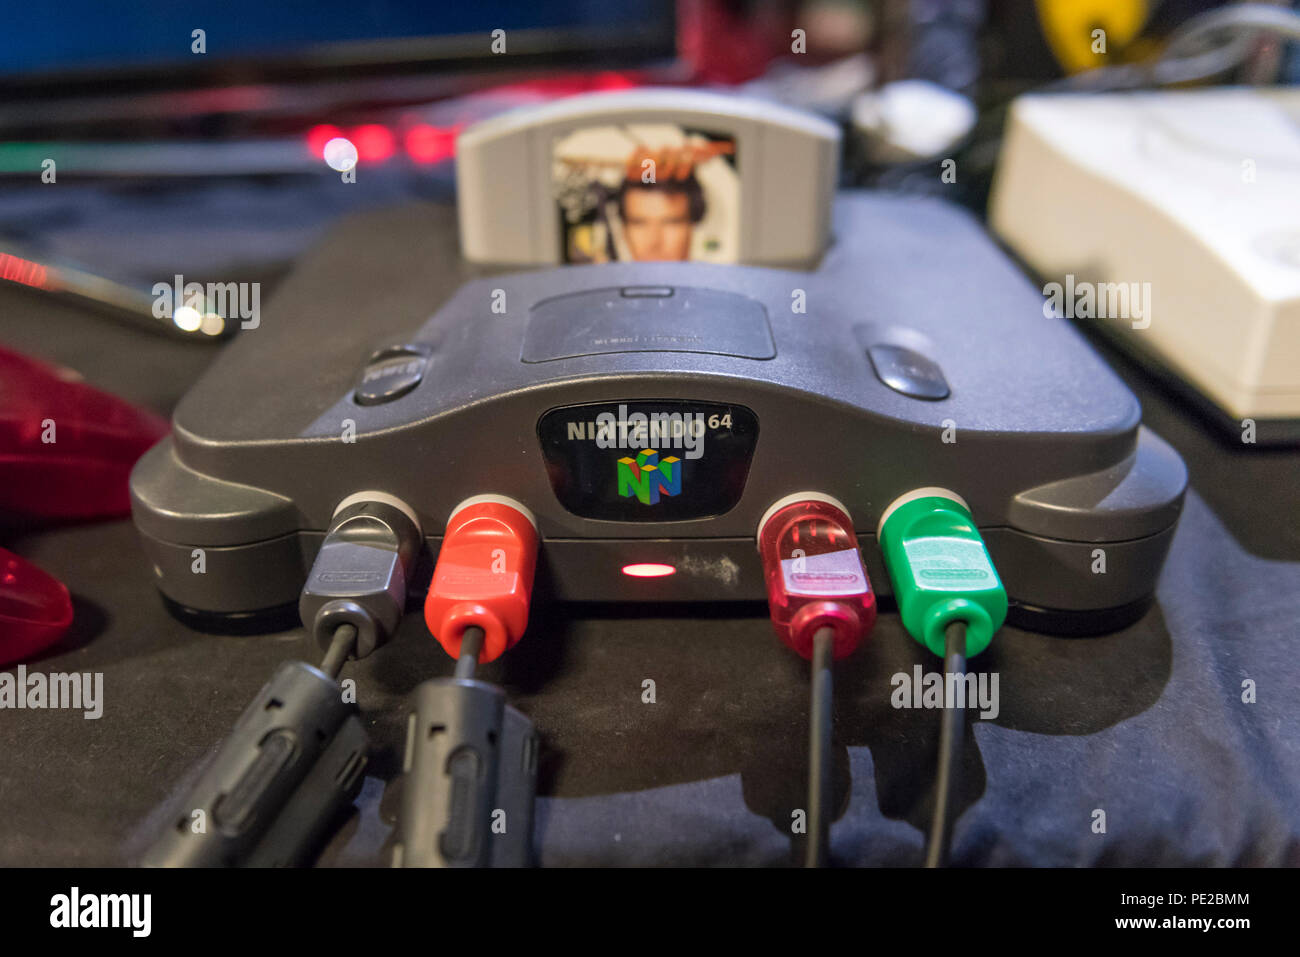 London, UK. 12 August 2018. A Nintendo 64 console at retro games festival  PLAY Expo held in London for the first time at Printworks, Canada Water.  Game enthusiasts visited to rediscover the